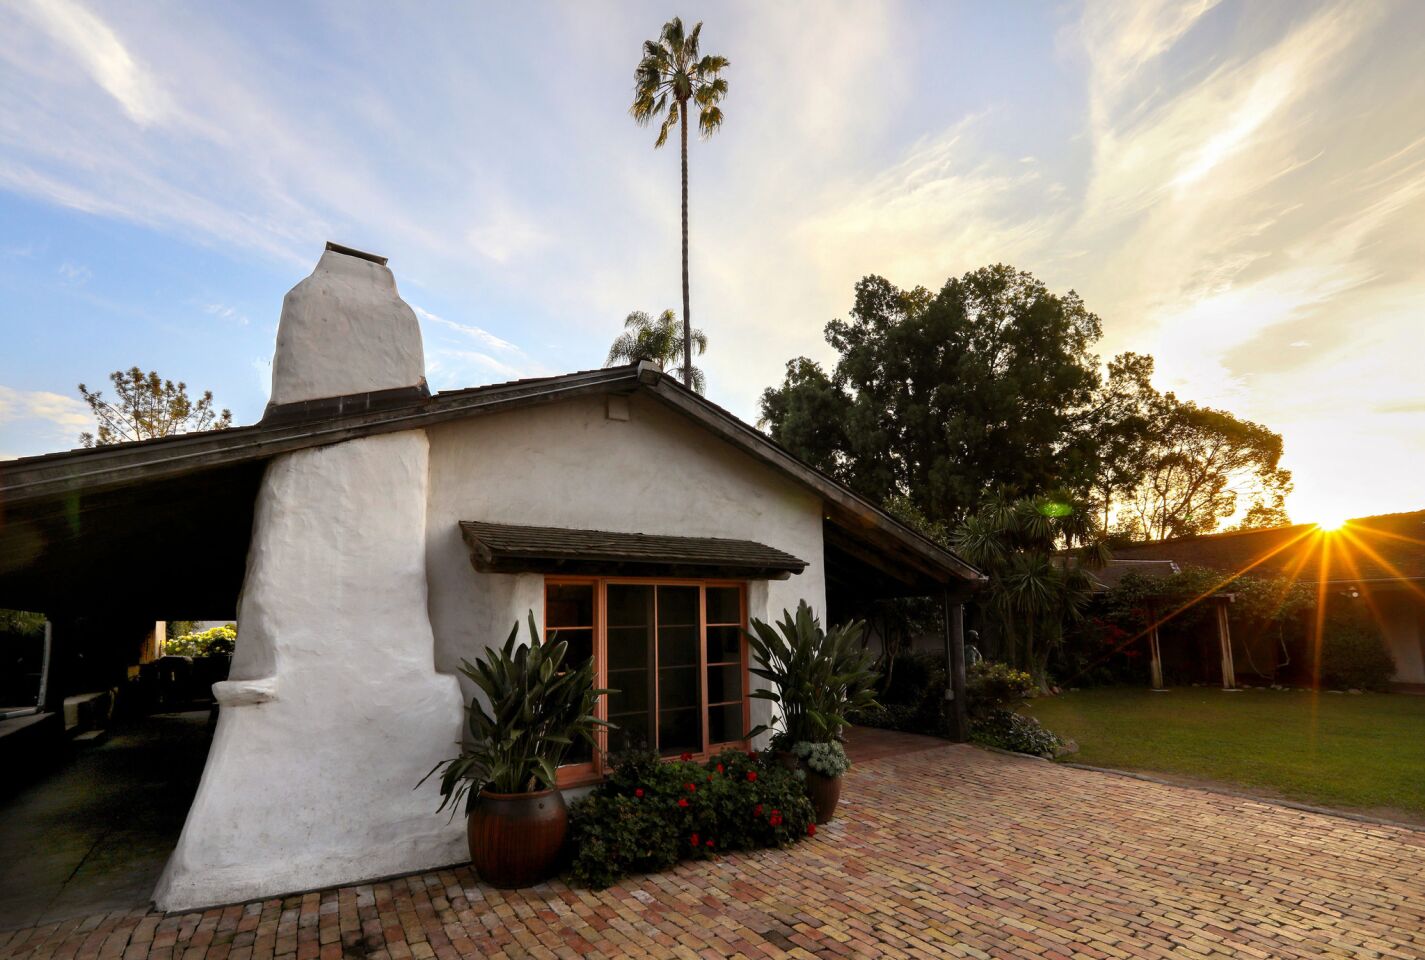 Exterior view of the Rancho Buena Vista Adobe at sundown. The historic property, owned by the city of Vista, will host two tours on Halloween night focused on the 1852 building's haunted history.